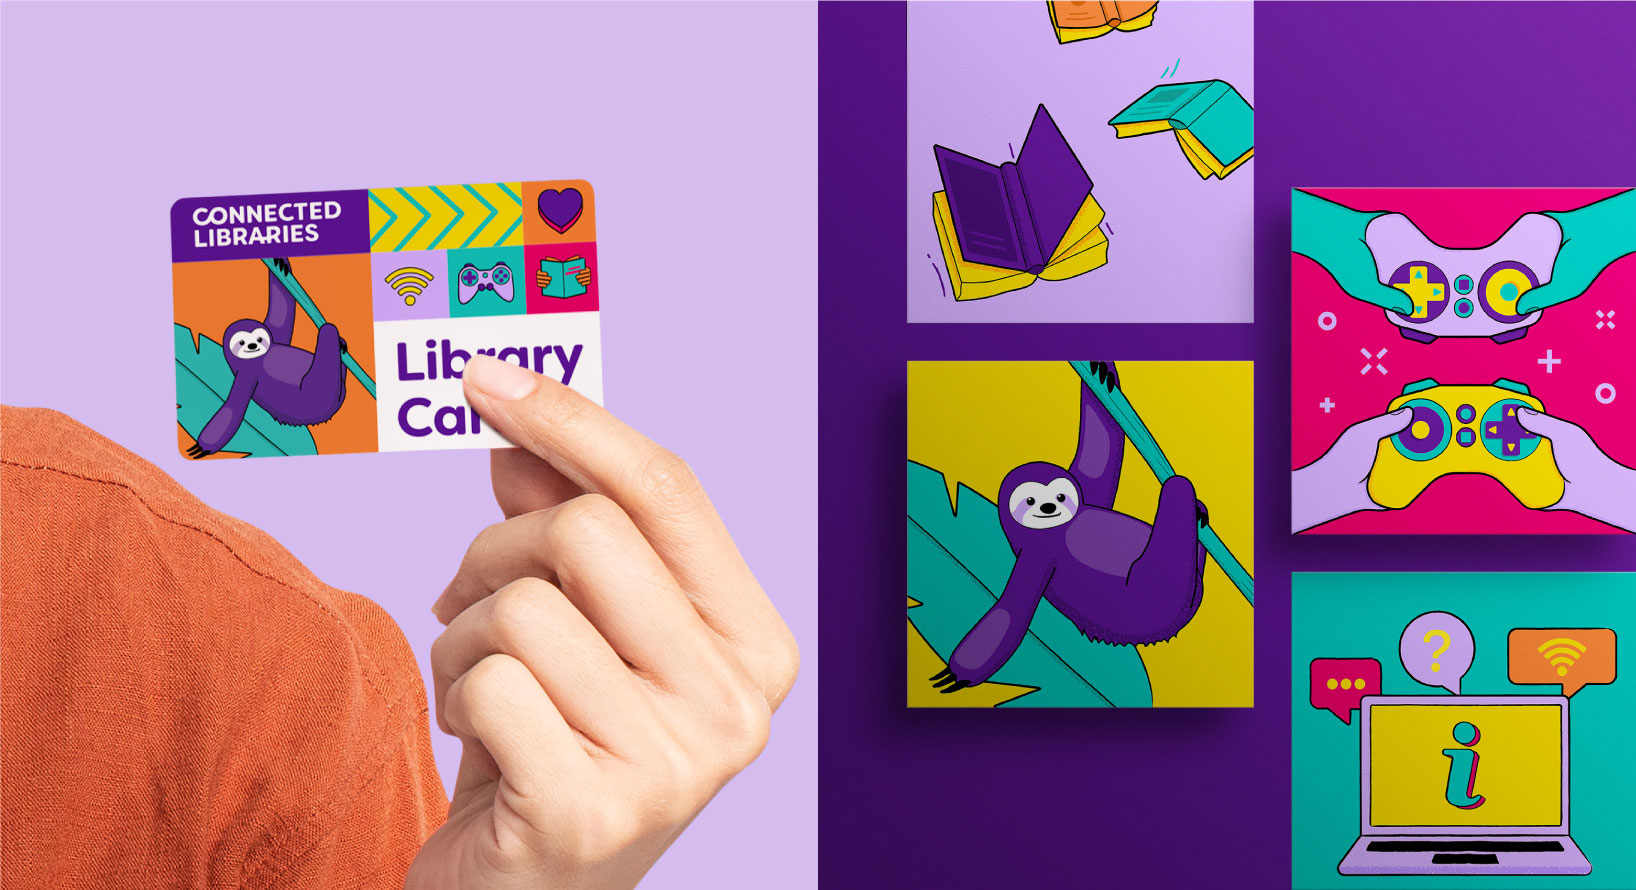 CCL Library Card and Illustrations